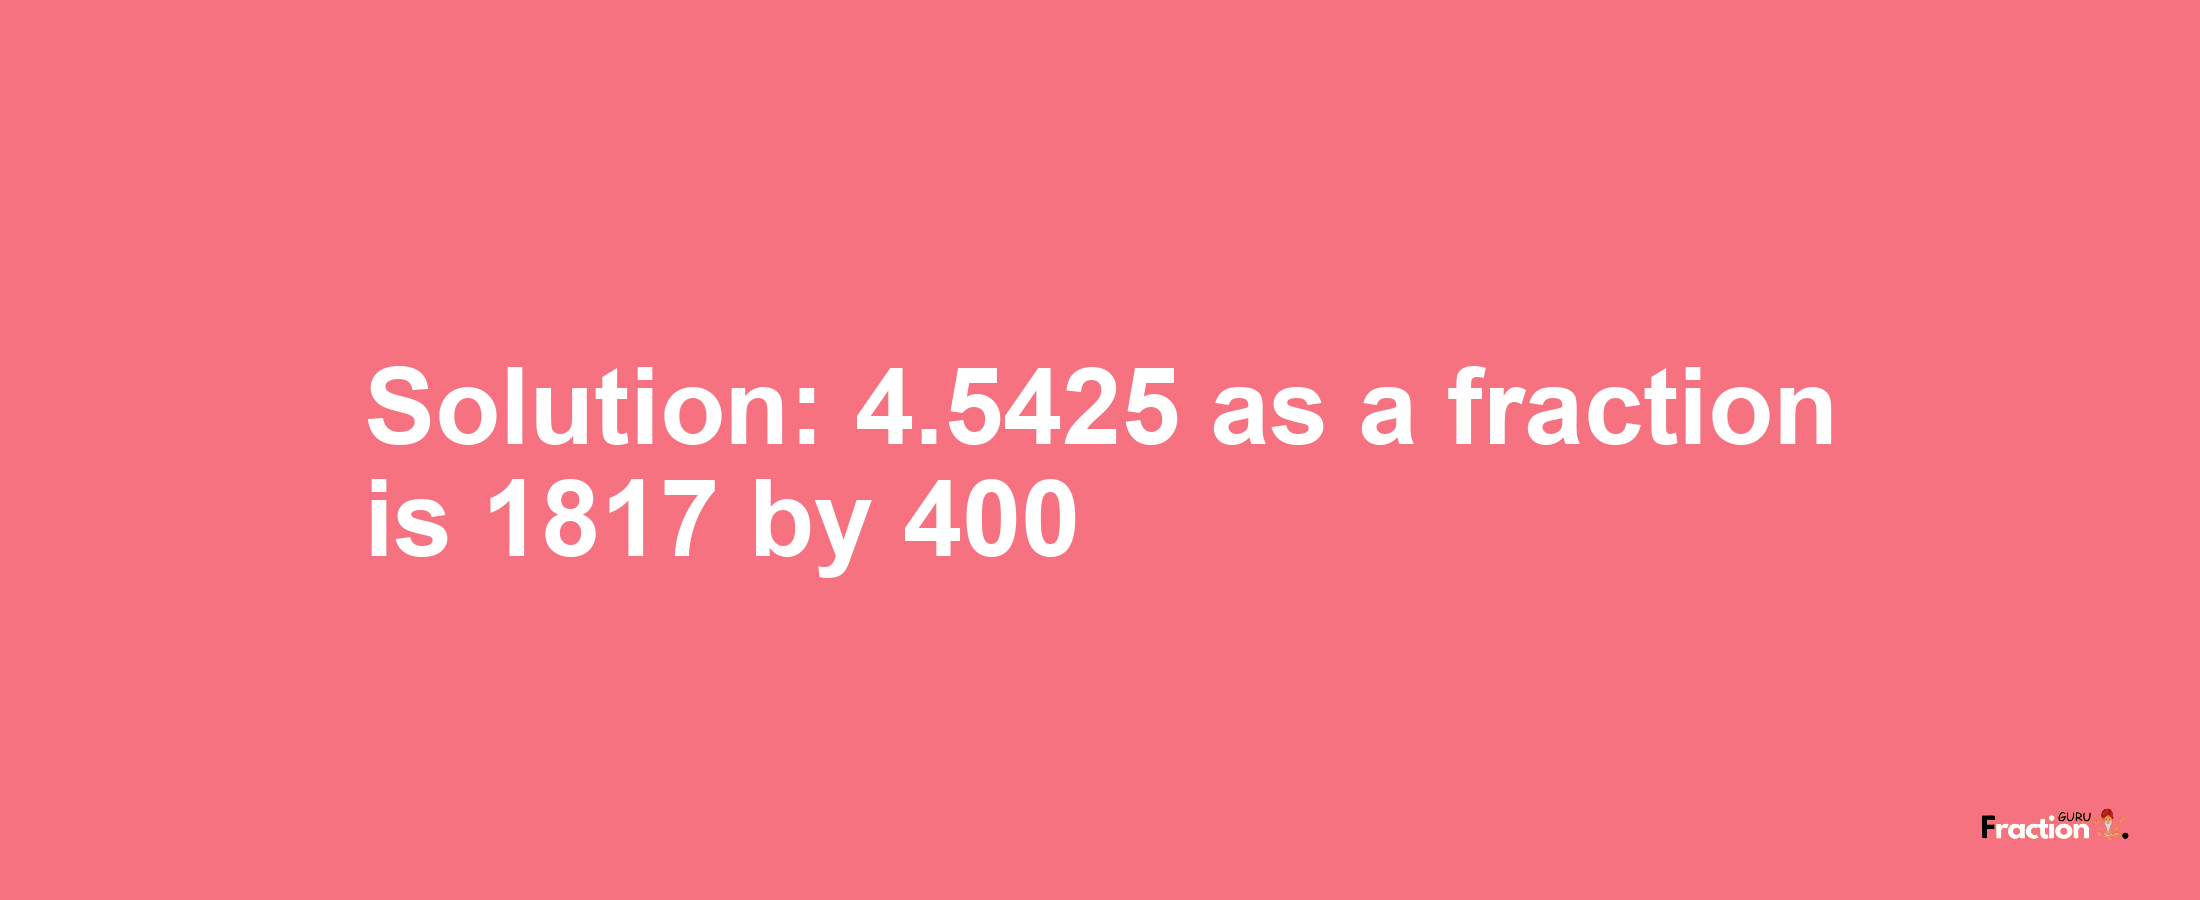 Solution:4.5425 as a fraction is 1817/400